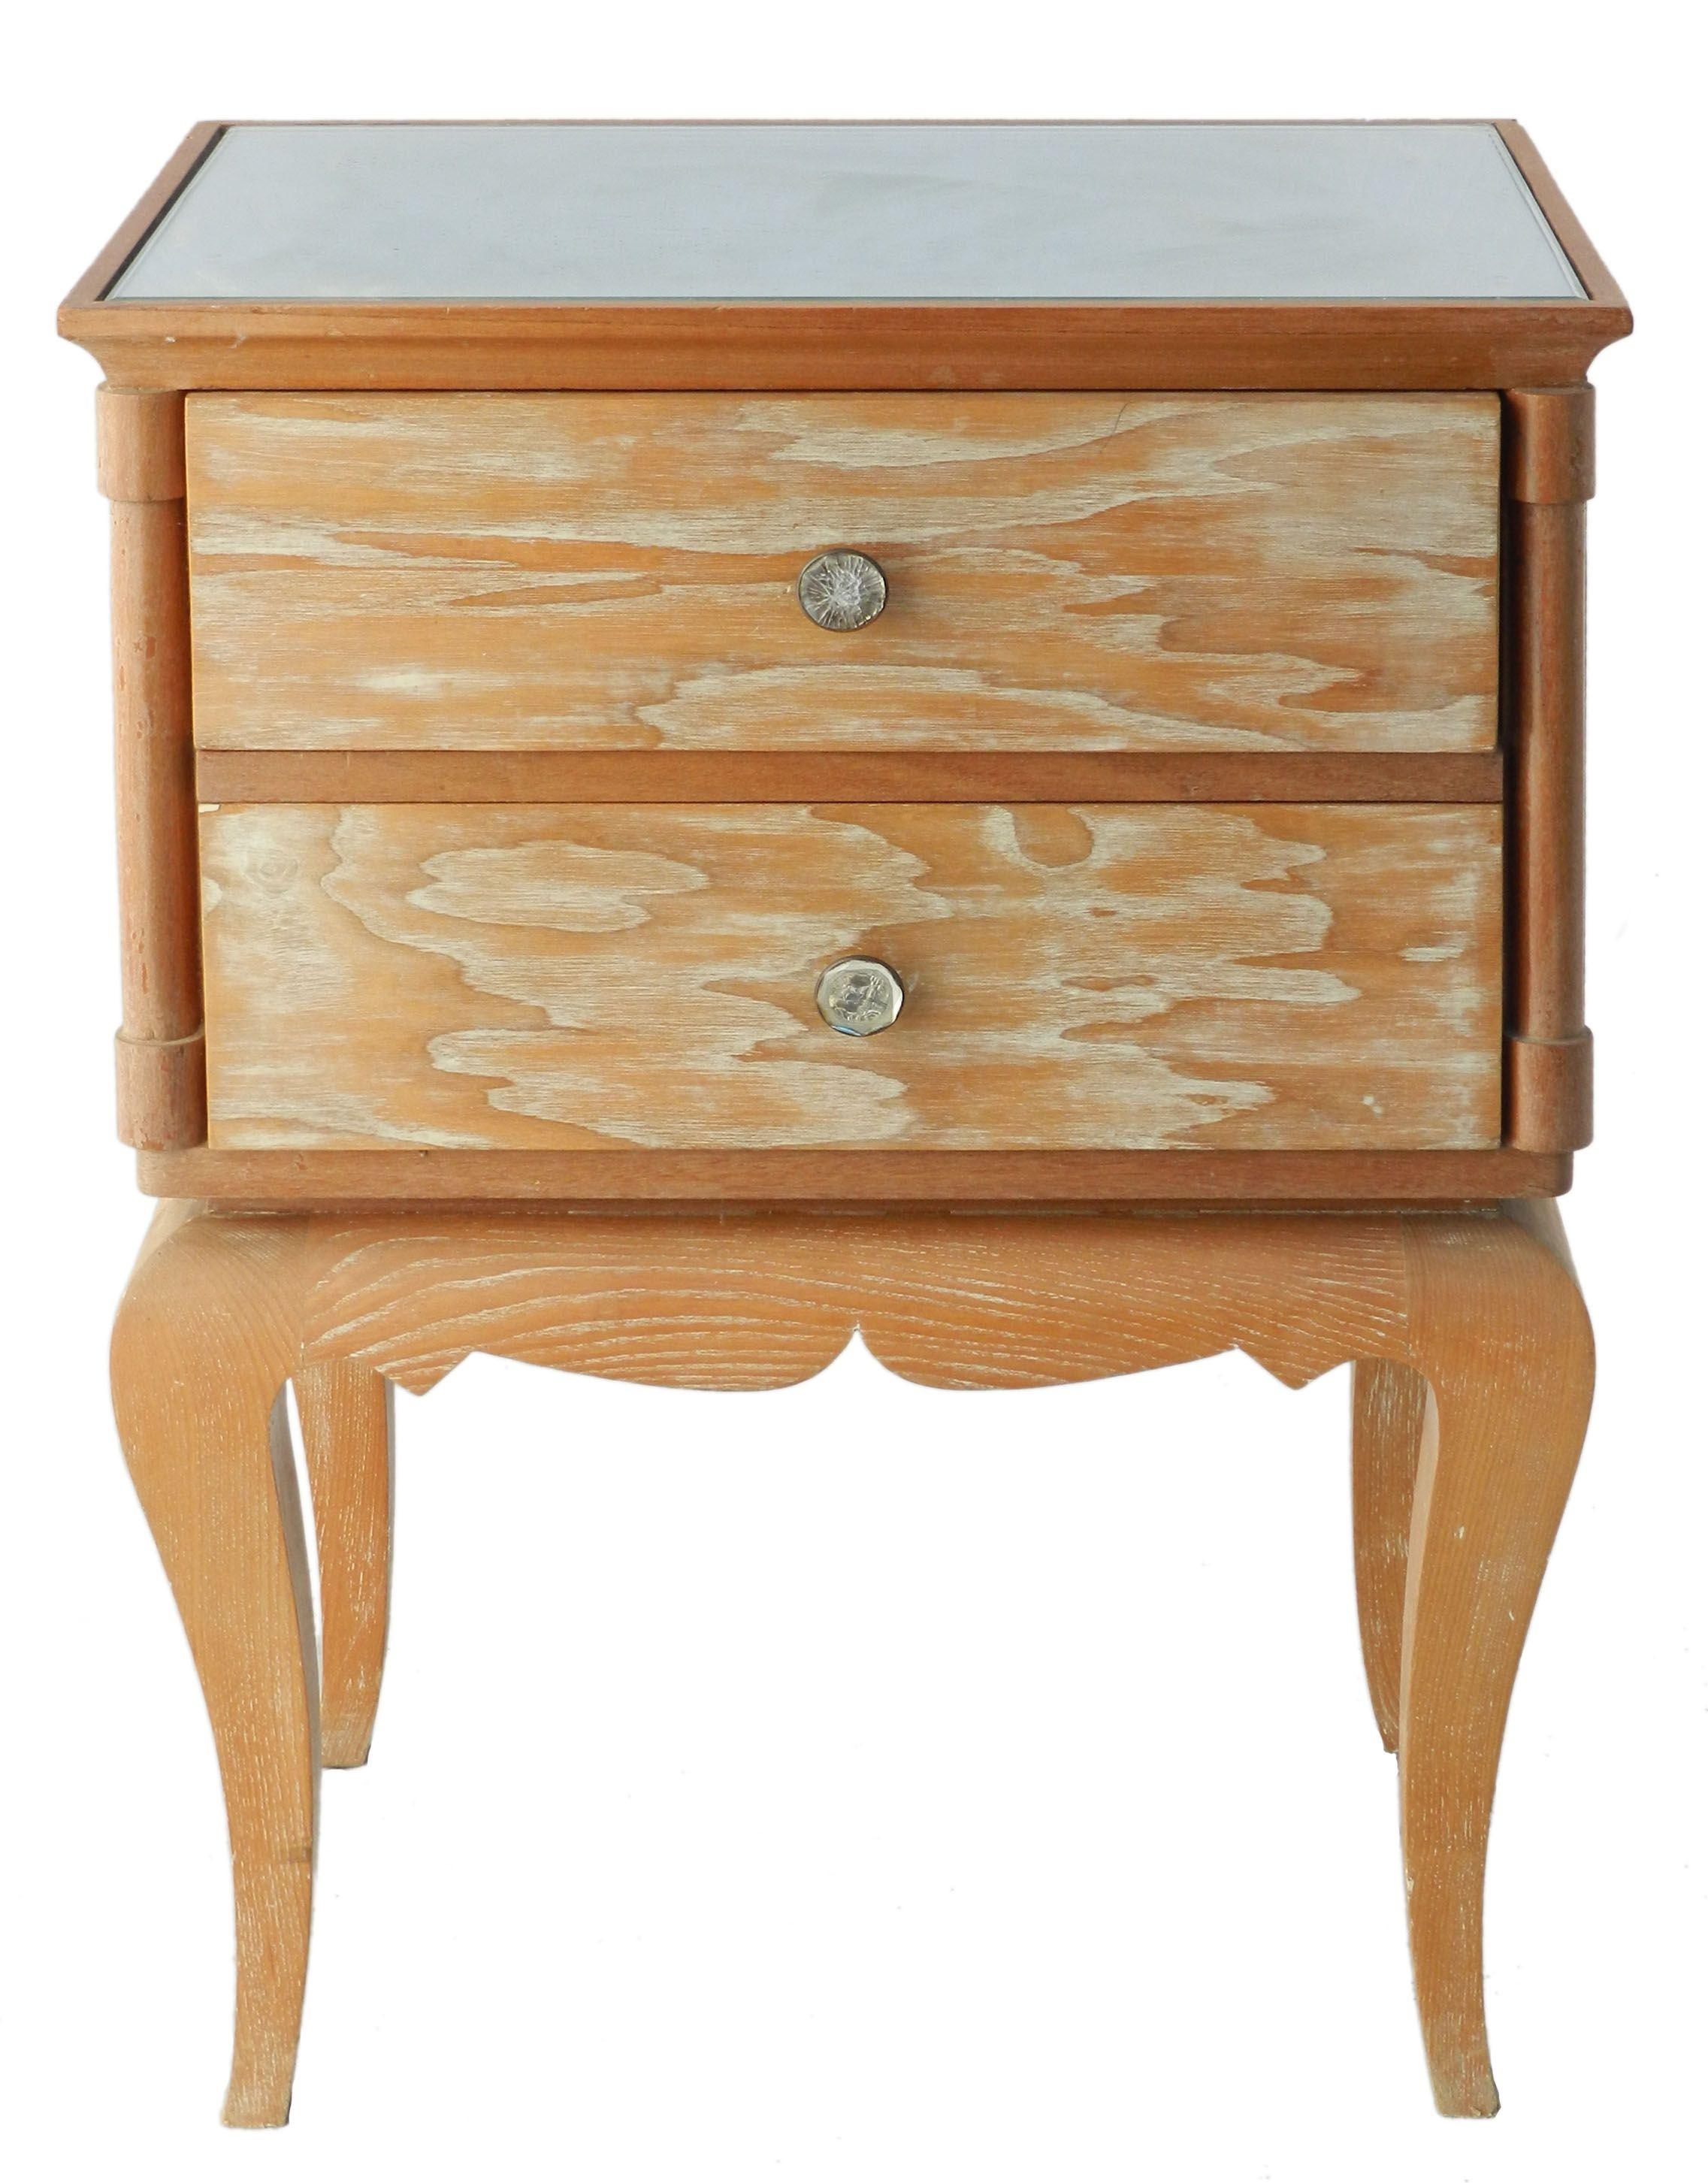 Nightstand limed oak mirror top bedside table mid-century.
This has a mirror to the top
Good as a small storage chest of drawers
Splendid patina with limed oak
Very good vintage condition with just one button that has very small damage not serious.